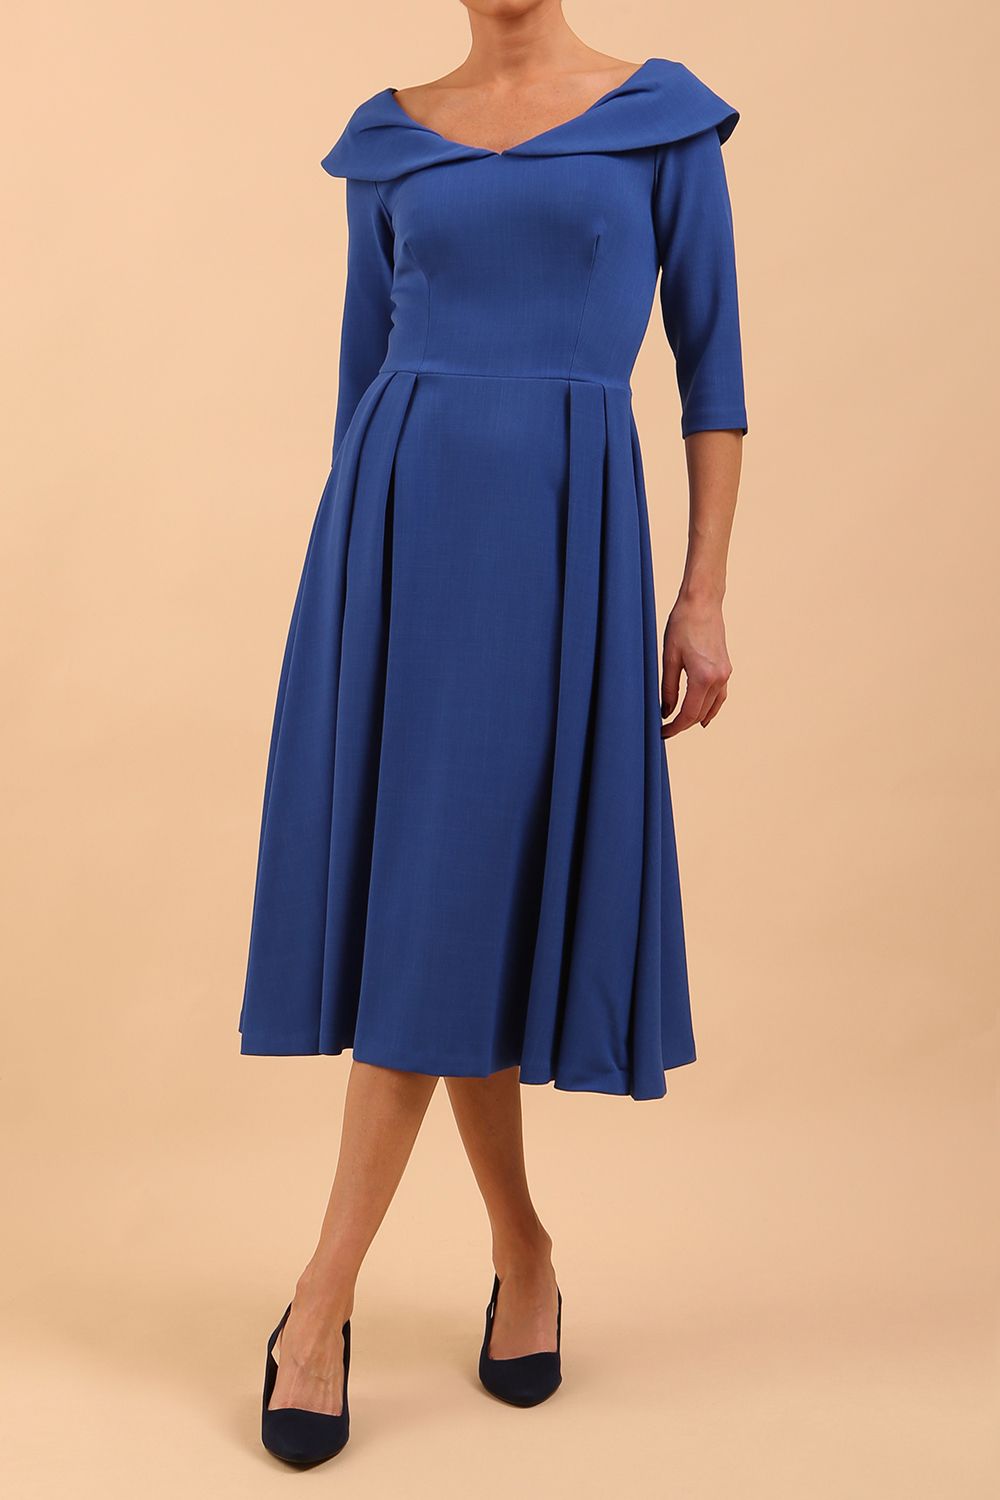 Model wearing Diva Catwalk Chesterton Sleeved dress with oversized collar detail and a-line swing pleated skirt in colour cobalt blue front